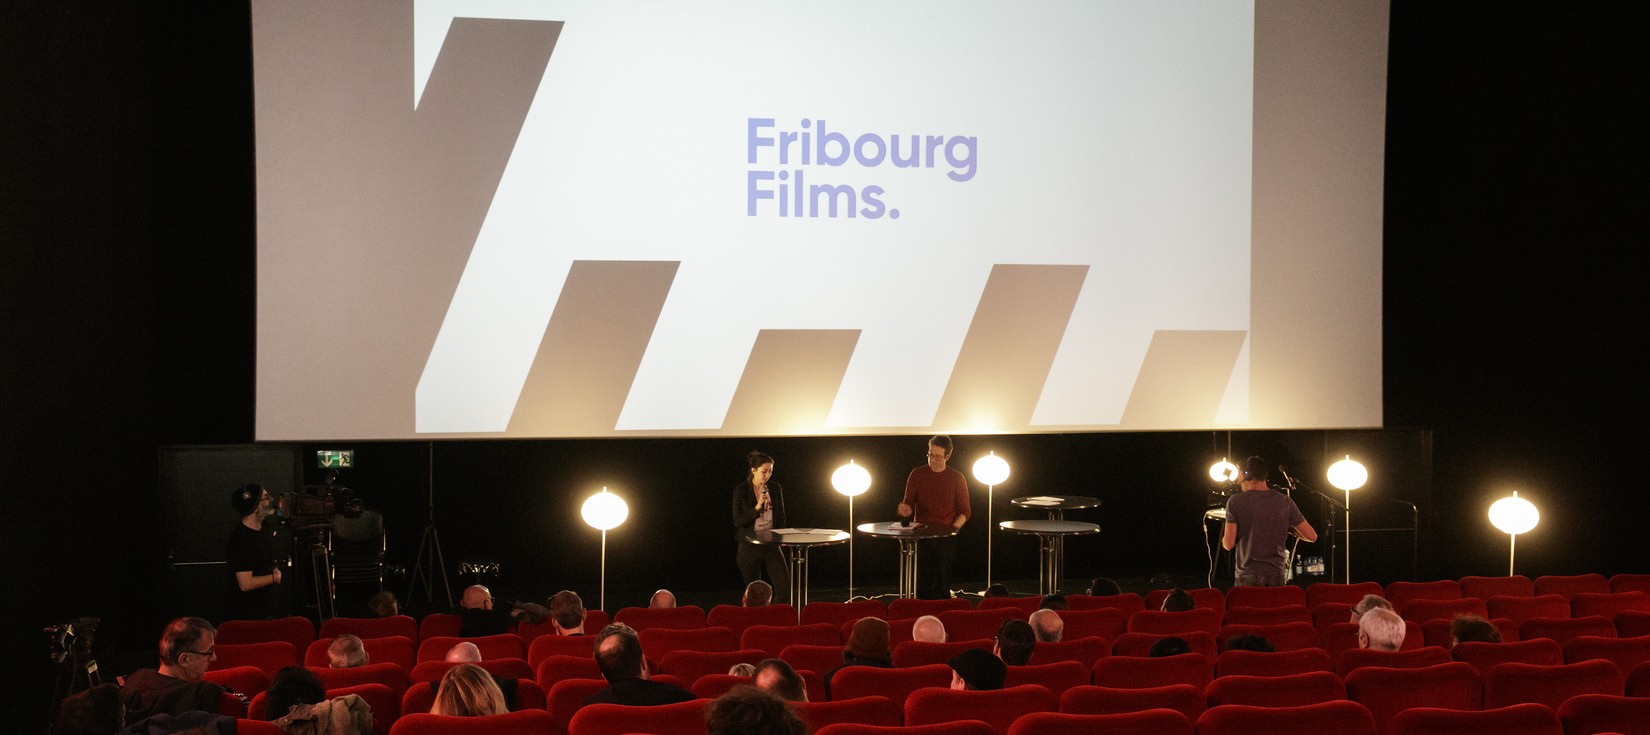 Fribourg Films film pitch